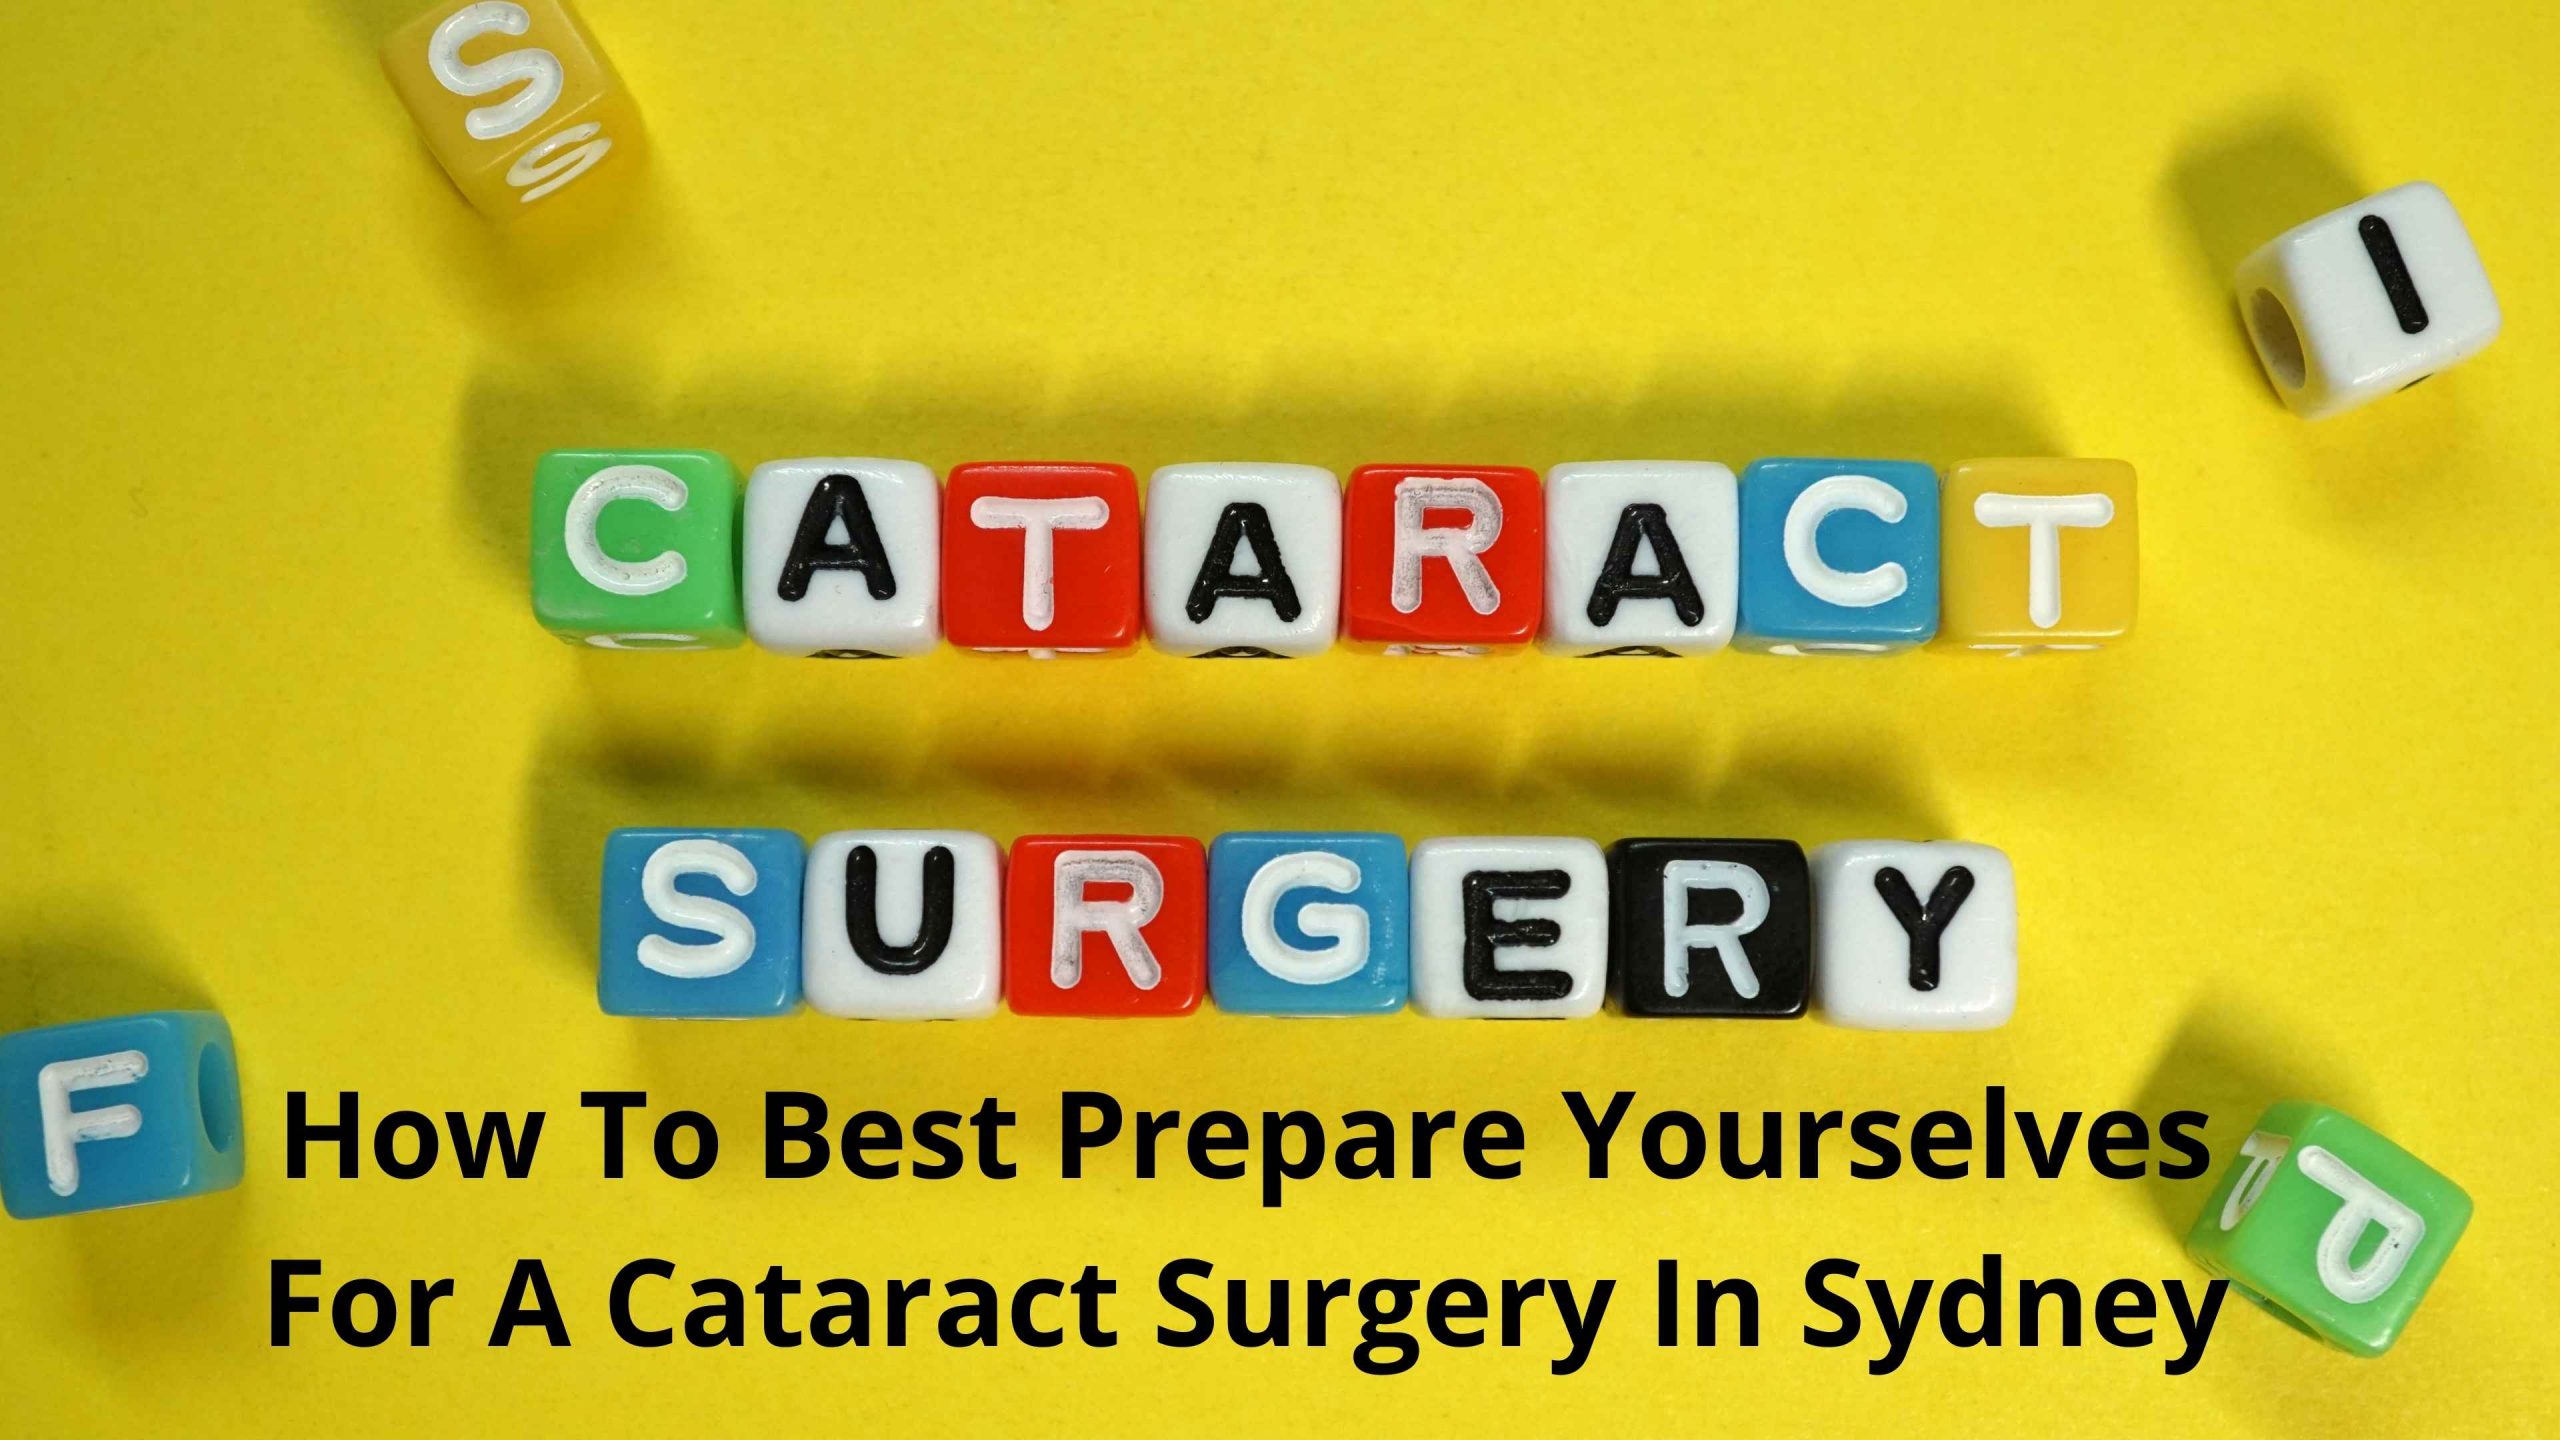 How To Best Prepare Yourselves For A Cataract Surgery In Sydney